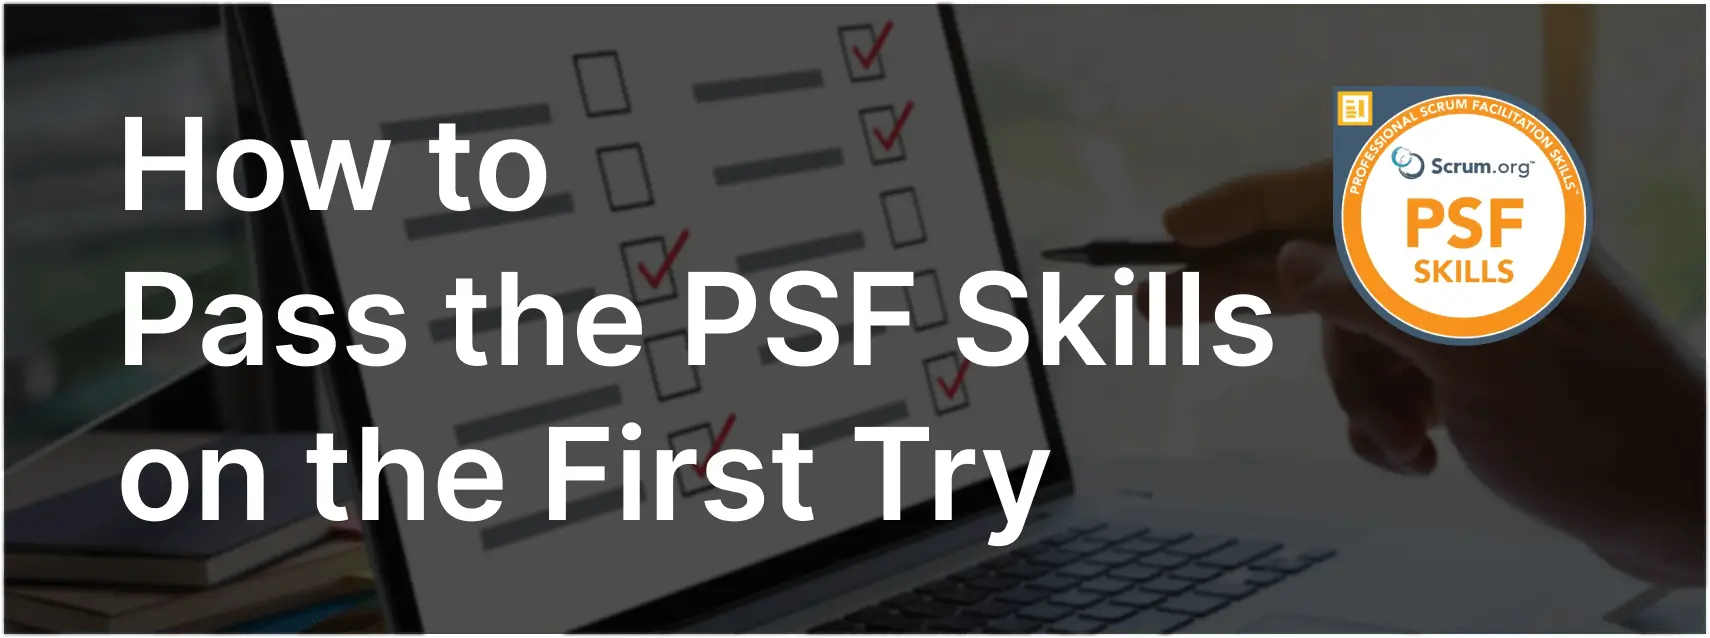 How To Pass PSF Skills Exam on the First Try